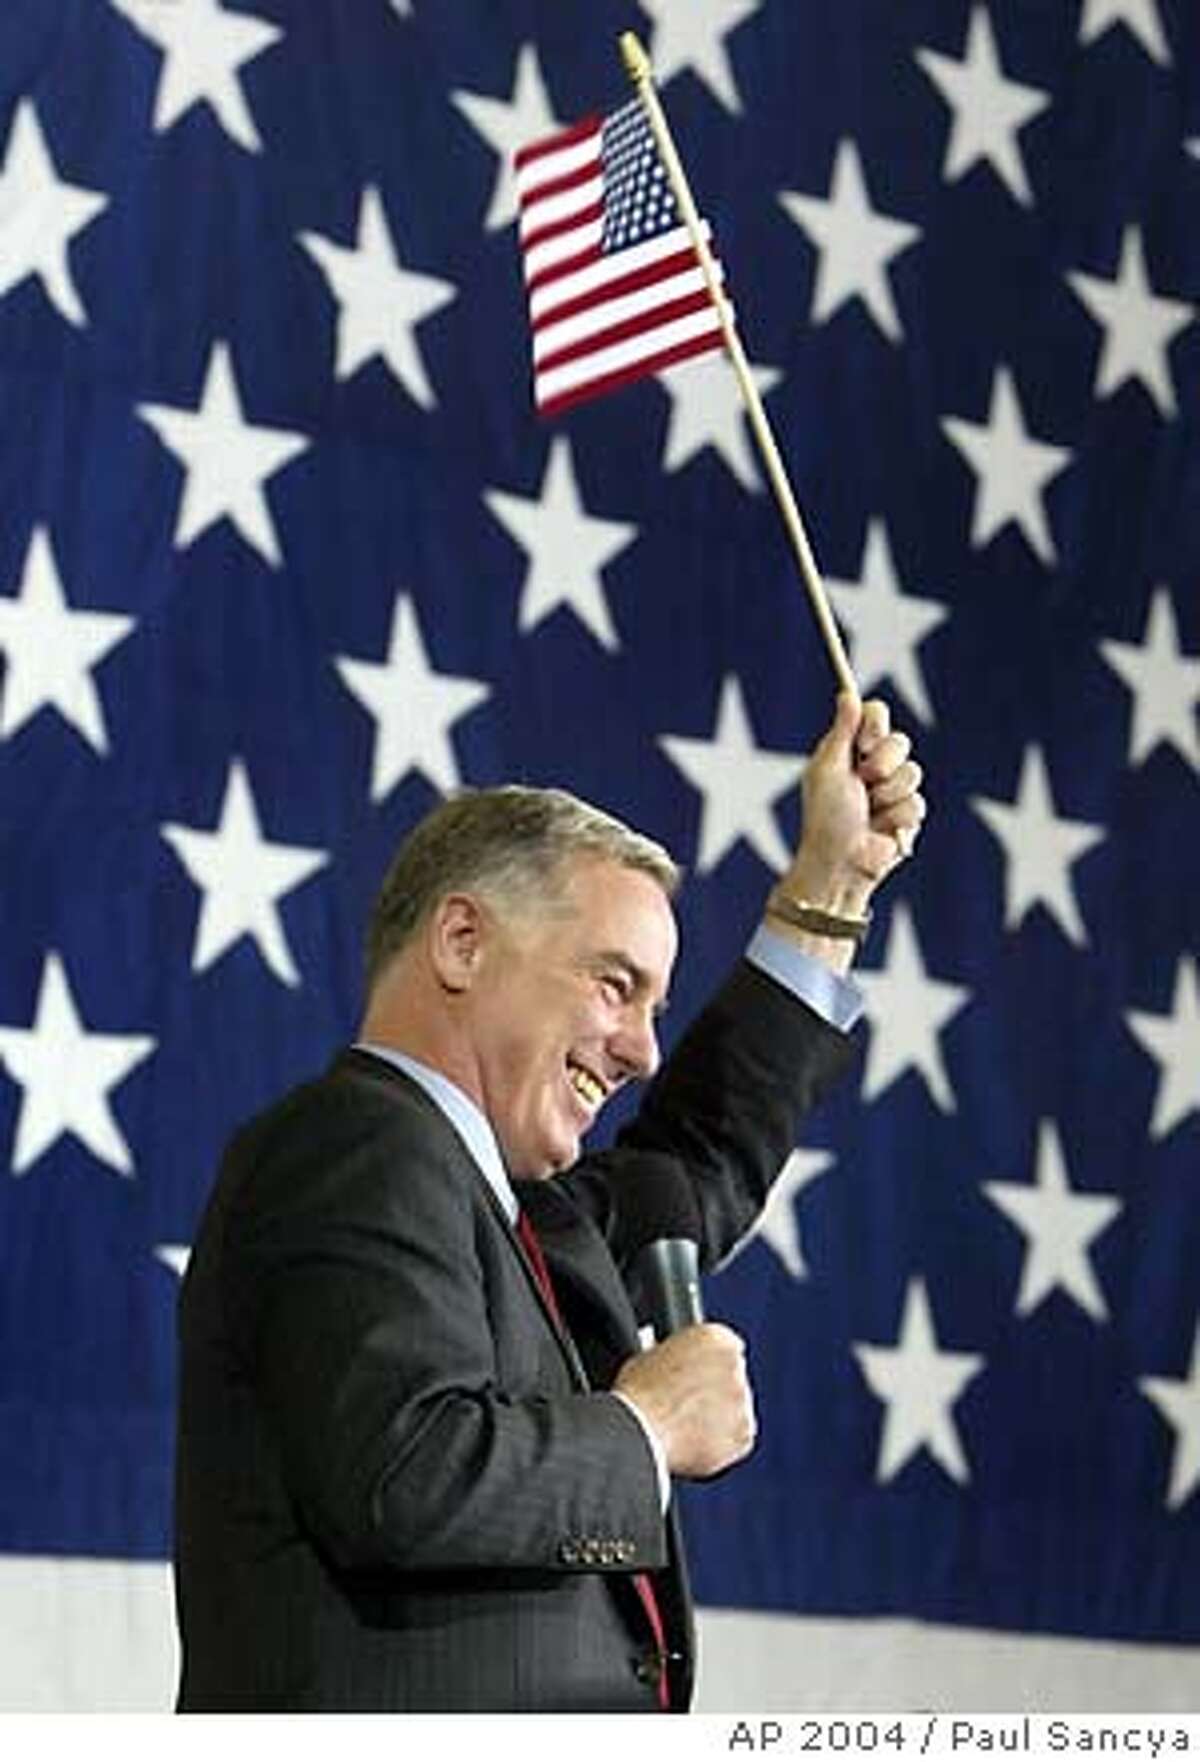 Howard Dean, confronted with a Confederate-flag-waving heckler during a primary rally in Concord, N.H., in 2004, had tried to court disaffected Southern voters. Associated Press photo, 2004, by Paul Sancya